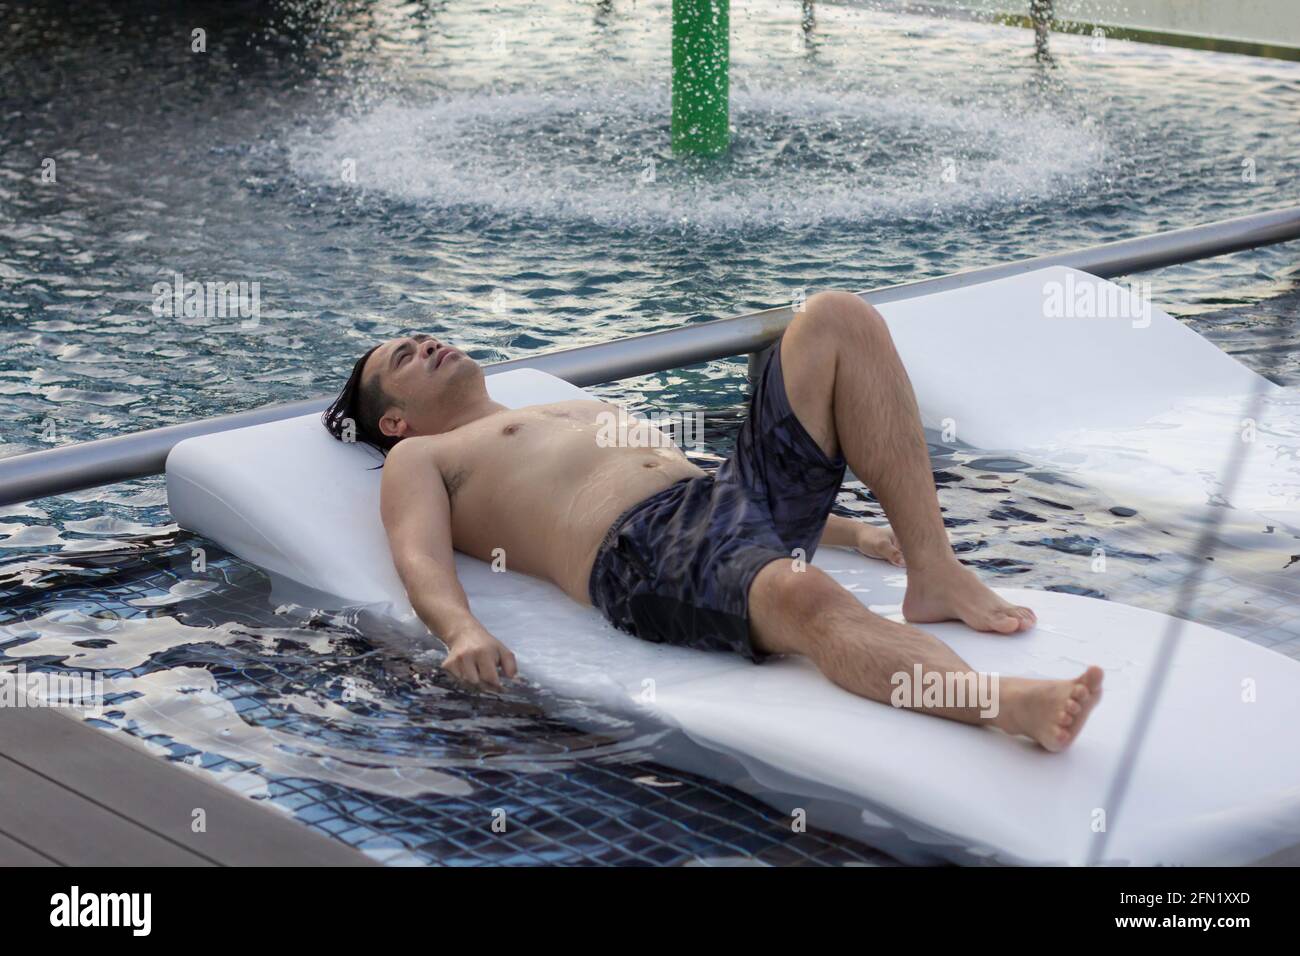 Float-out and enjoy. Stock Photo